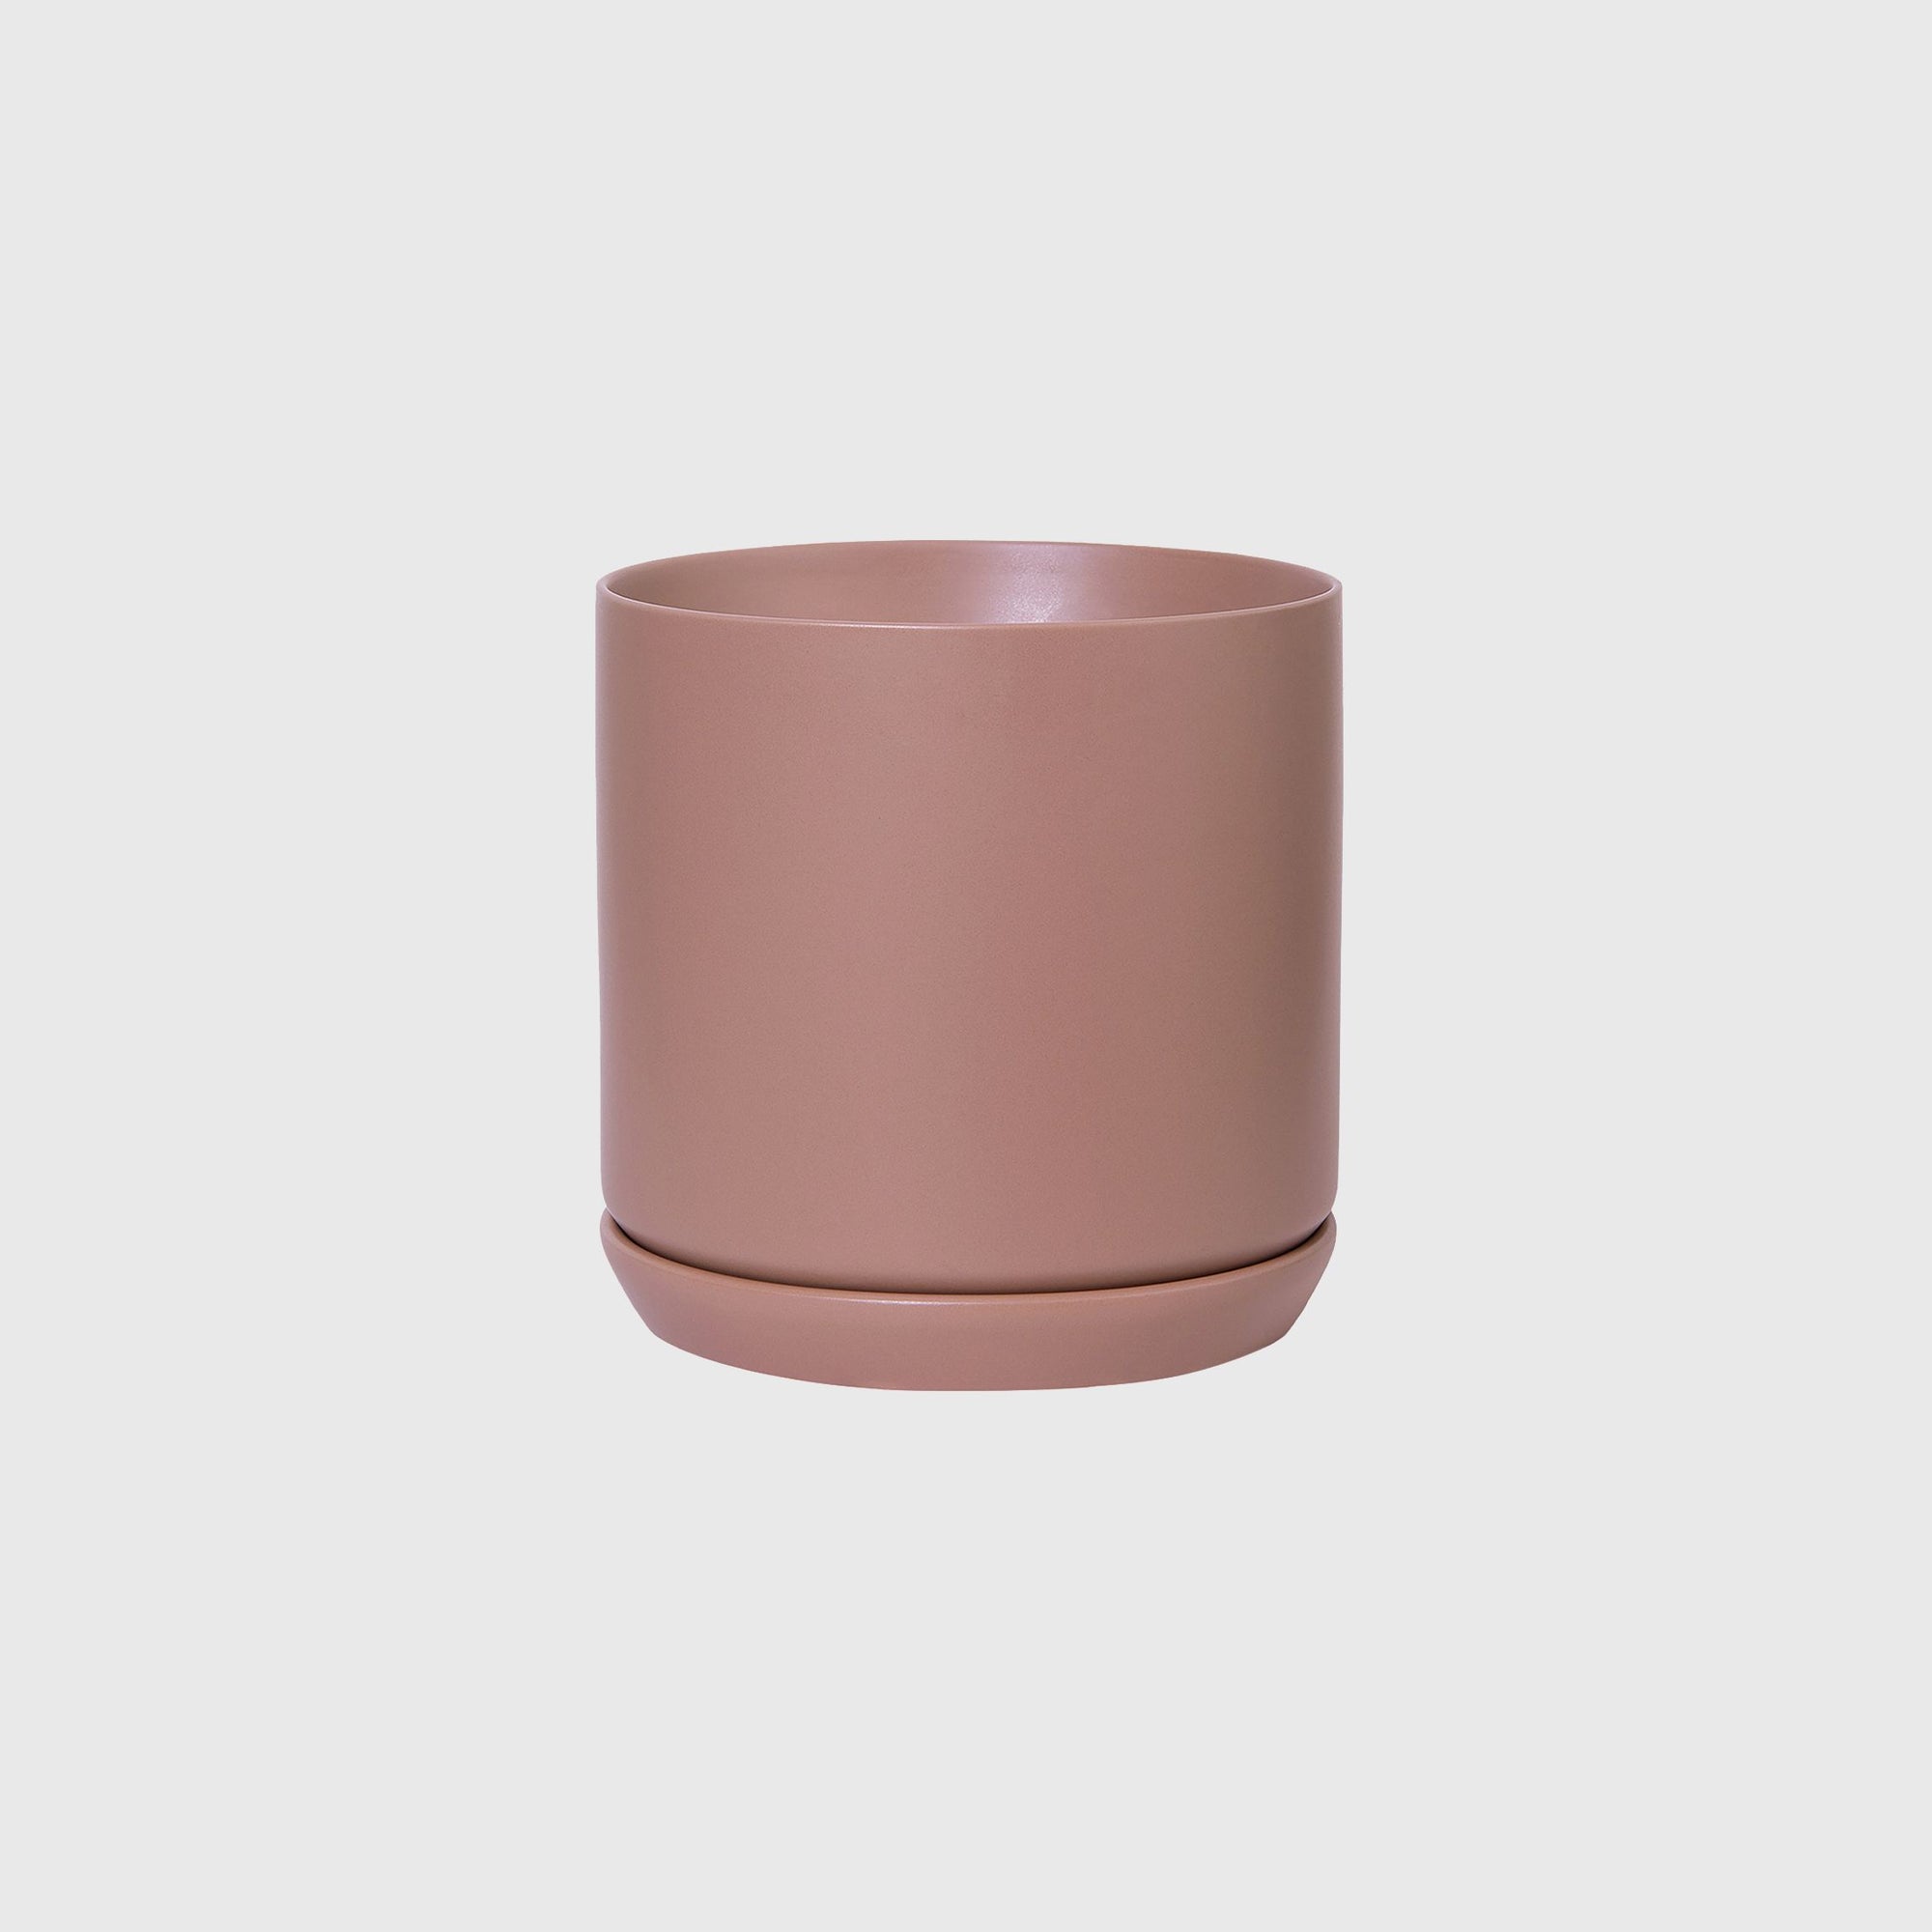 Oslo Planter Large - Dusty Rose - Urban Naturals